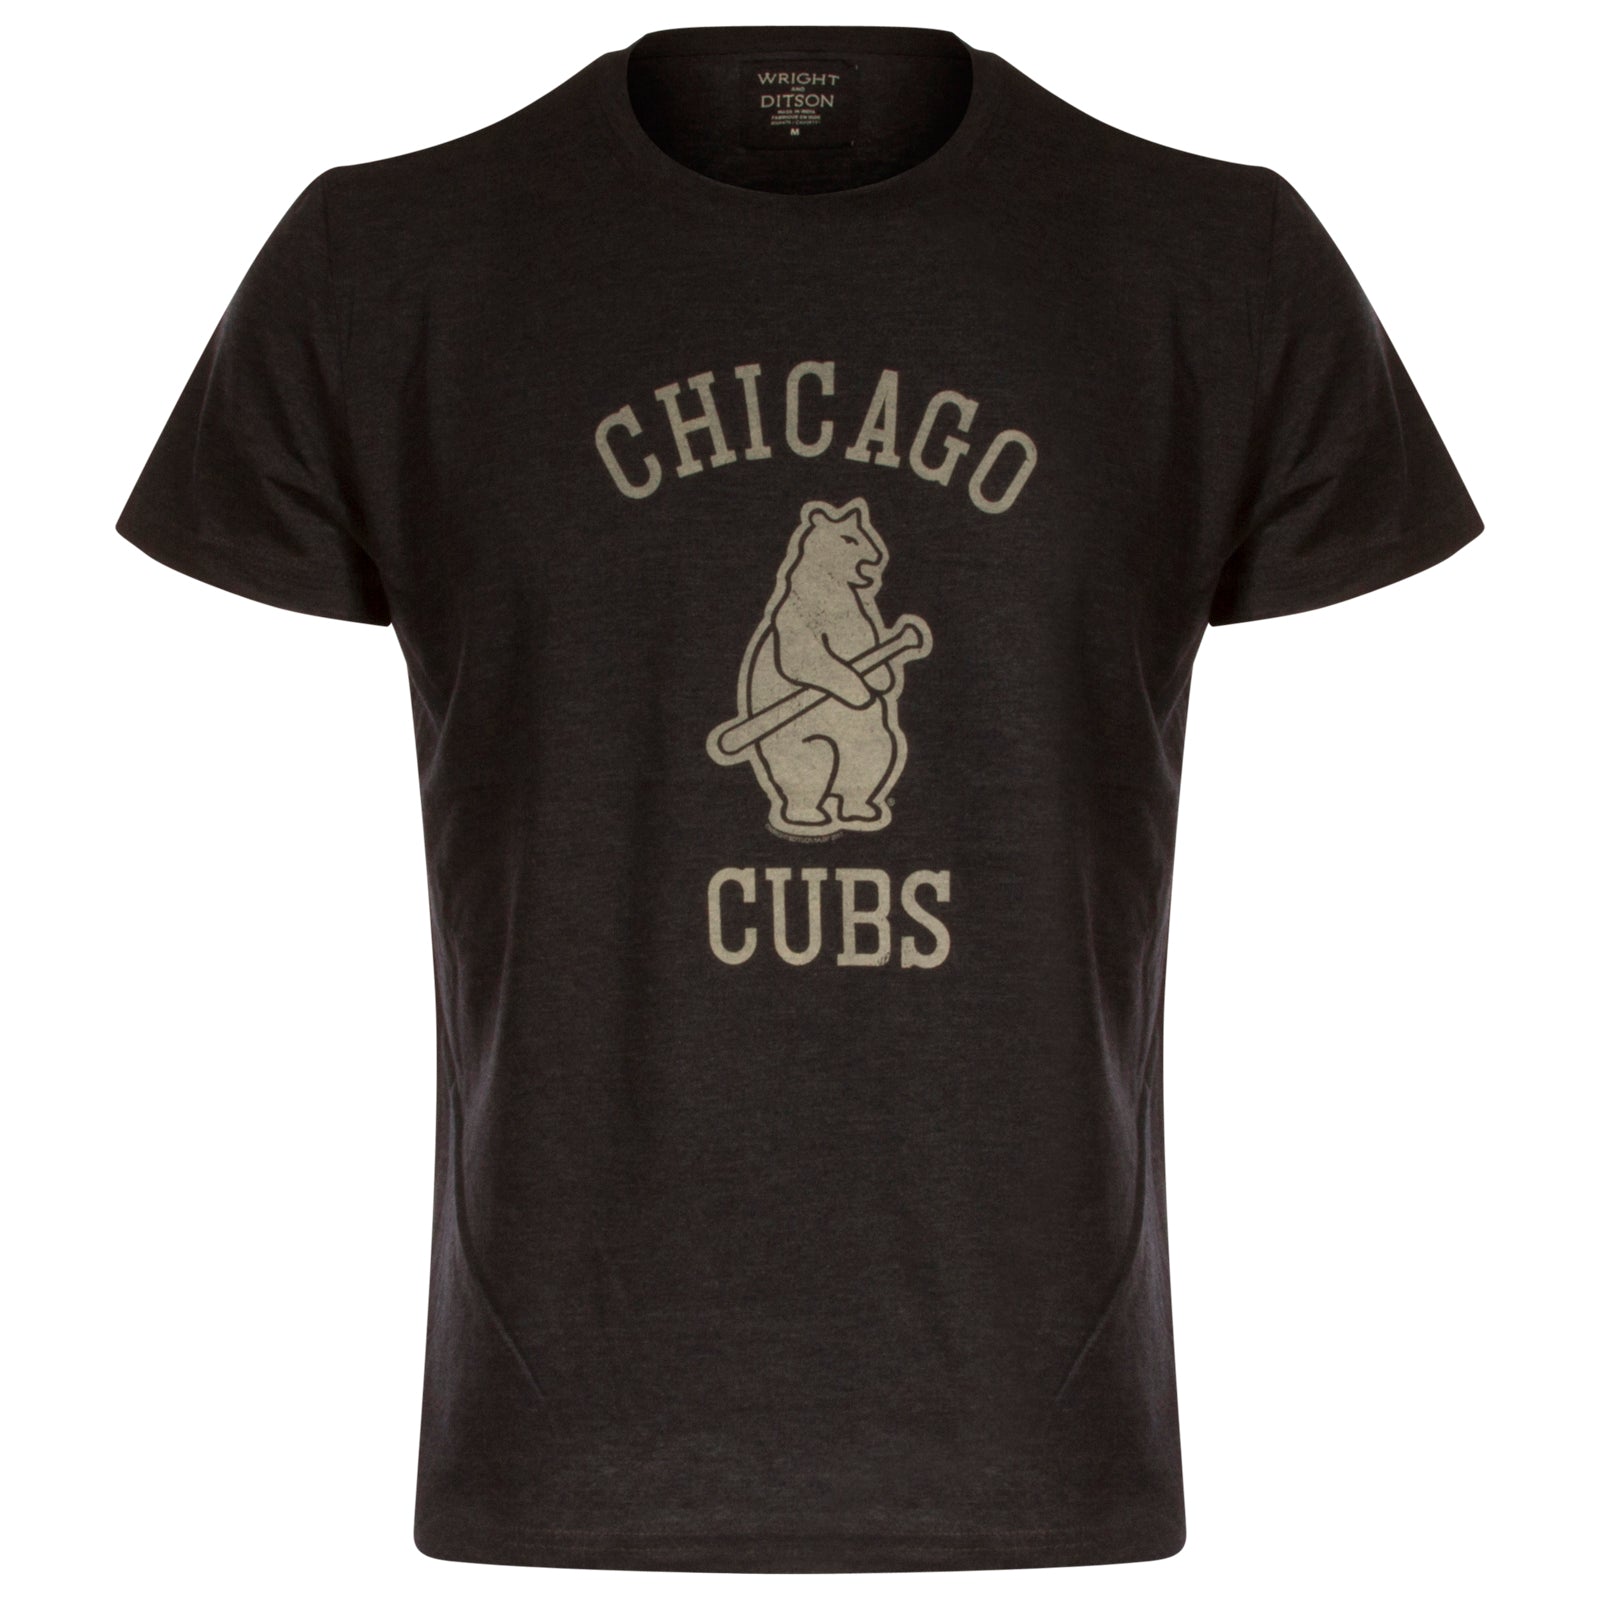 CHICAGO CUBS NEW ERA MEN'S 1914 NAVY AND WHITE GRADIENT TEE in